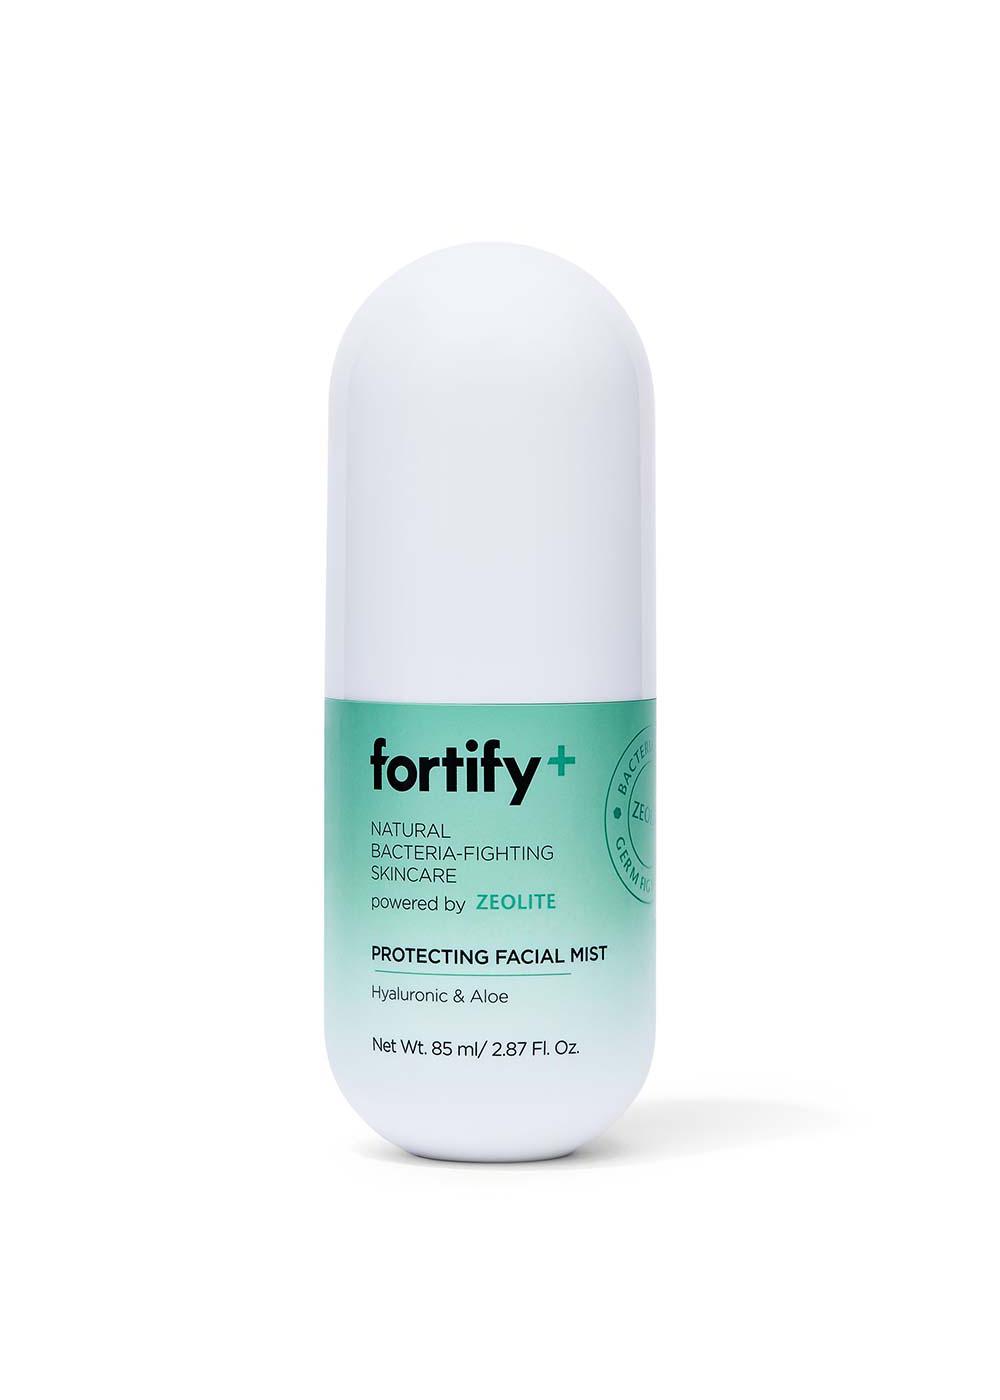 Fortify+ Protecting Facial Mist; image 1 of 4